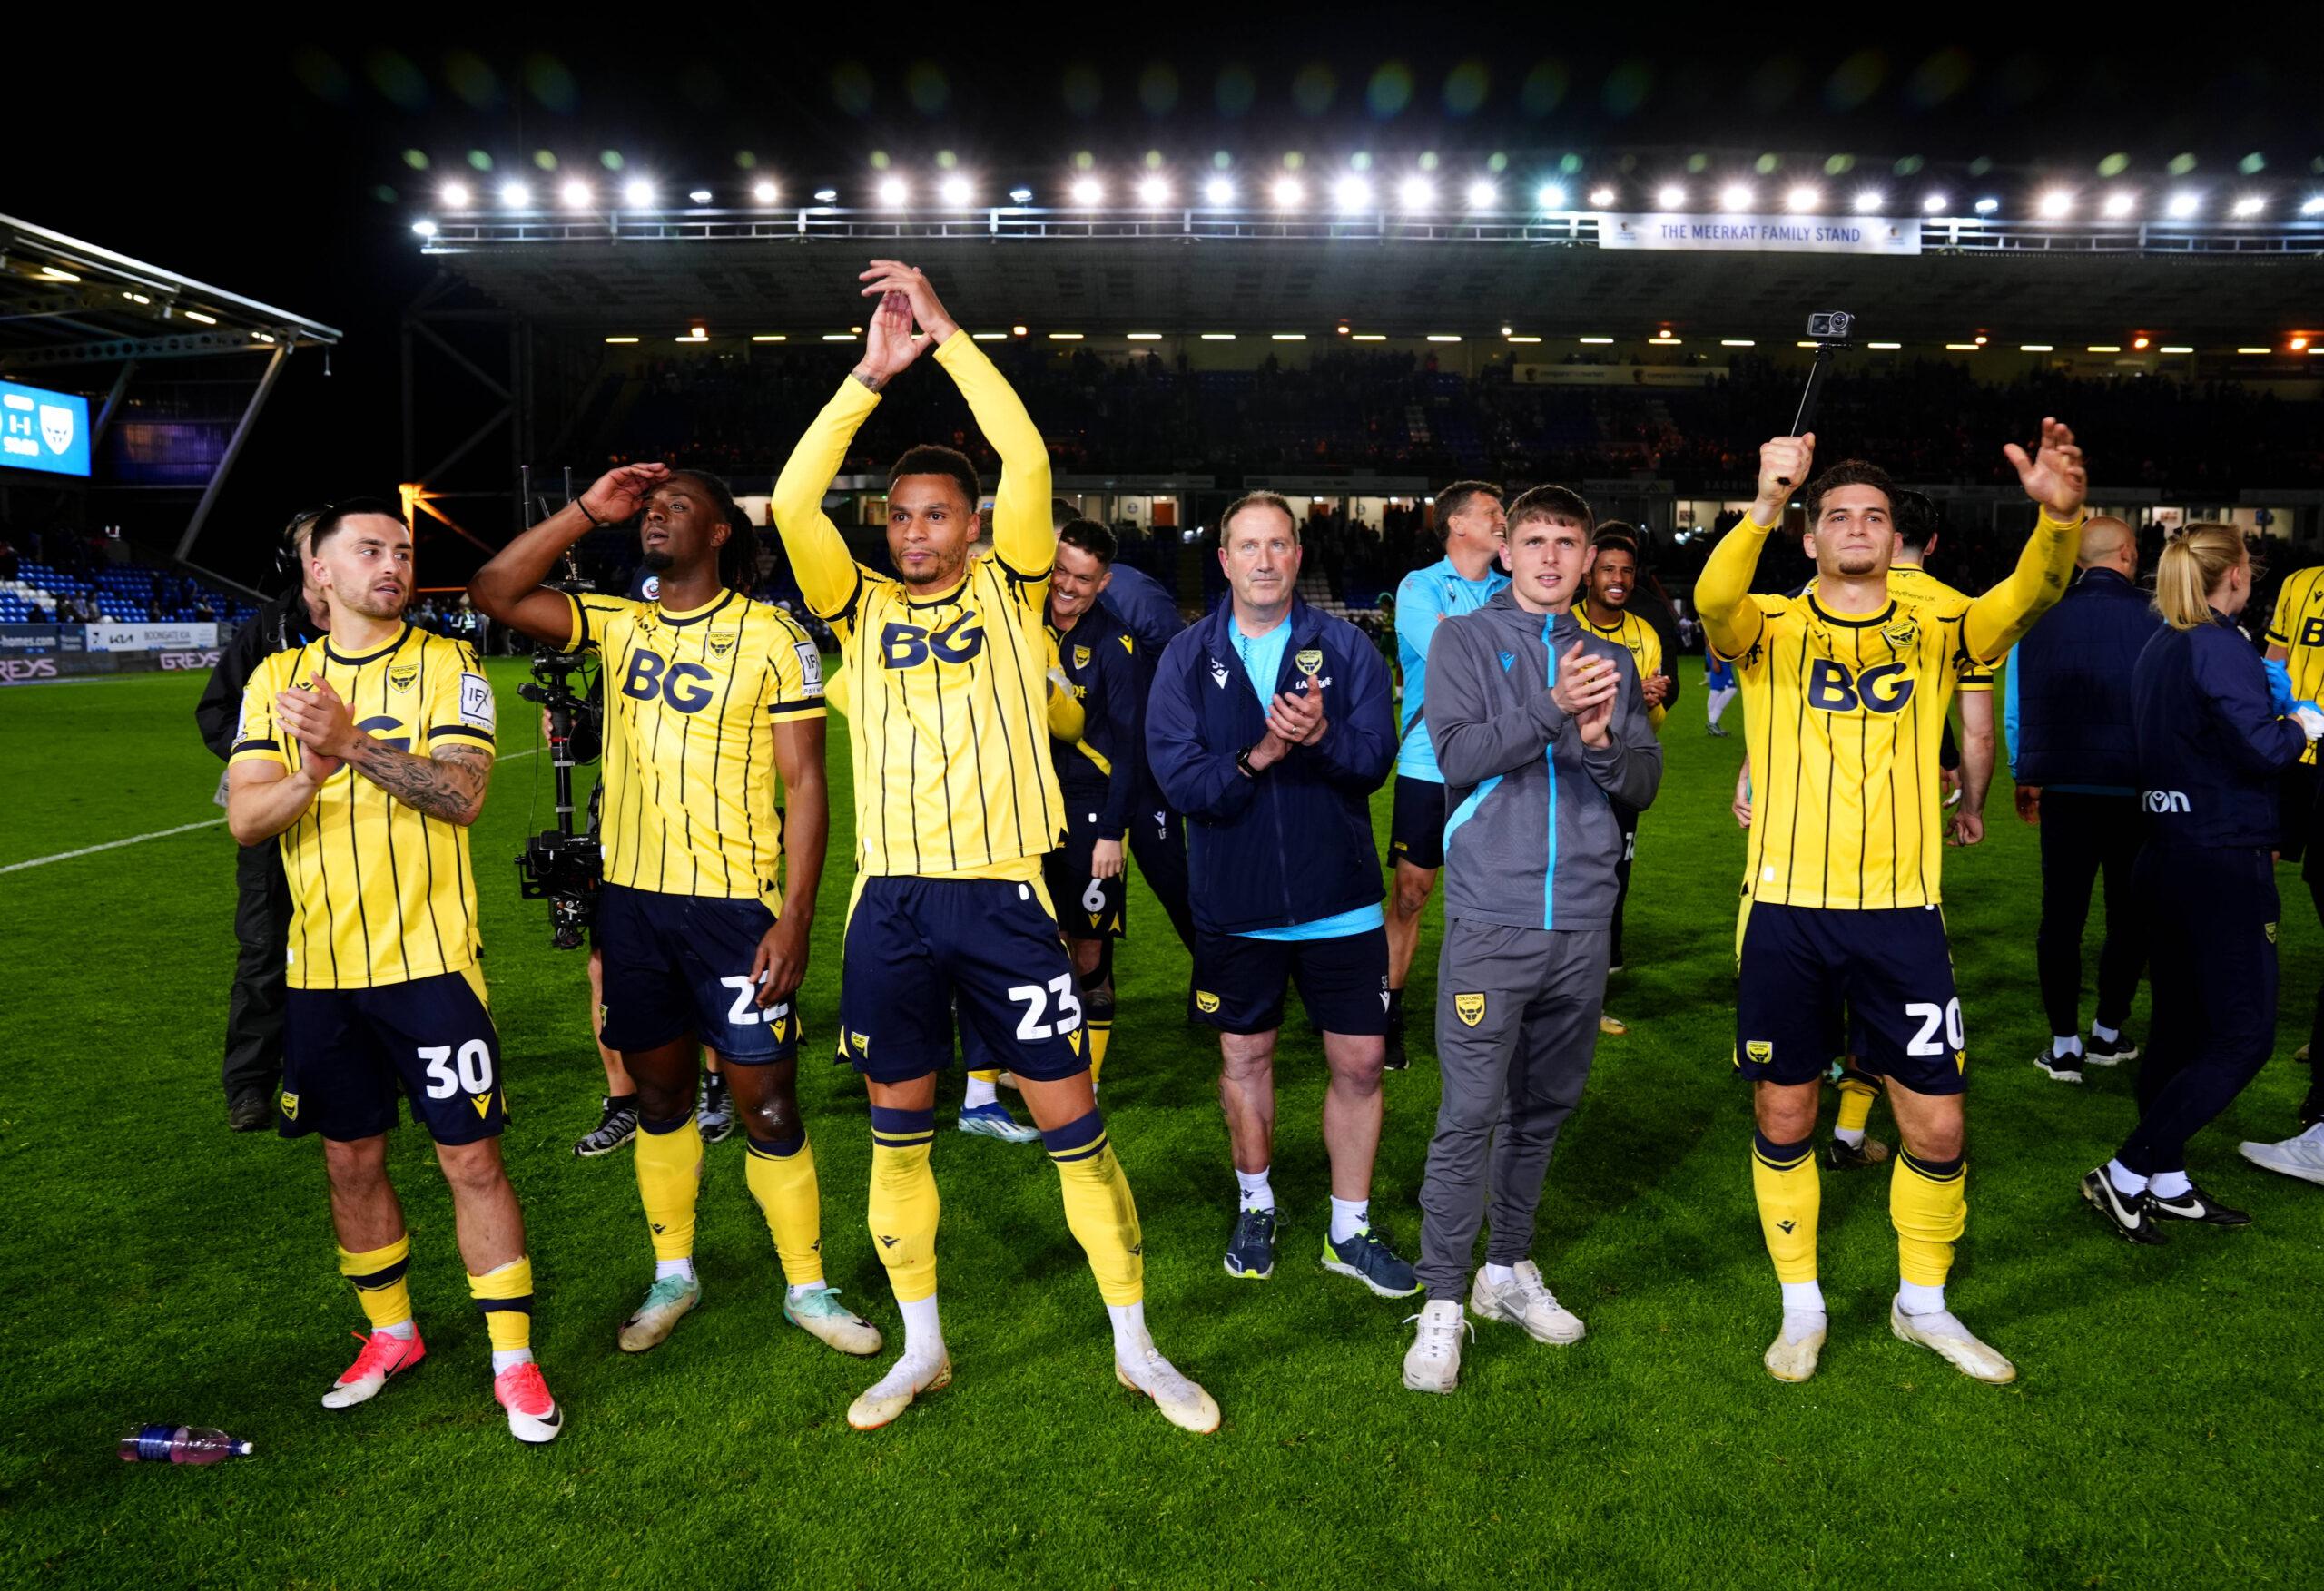 Oxford United Weekly Round-Up: Wembley Trip Booked and Stadium Boost